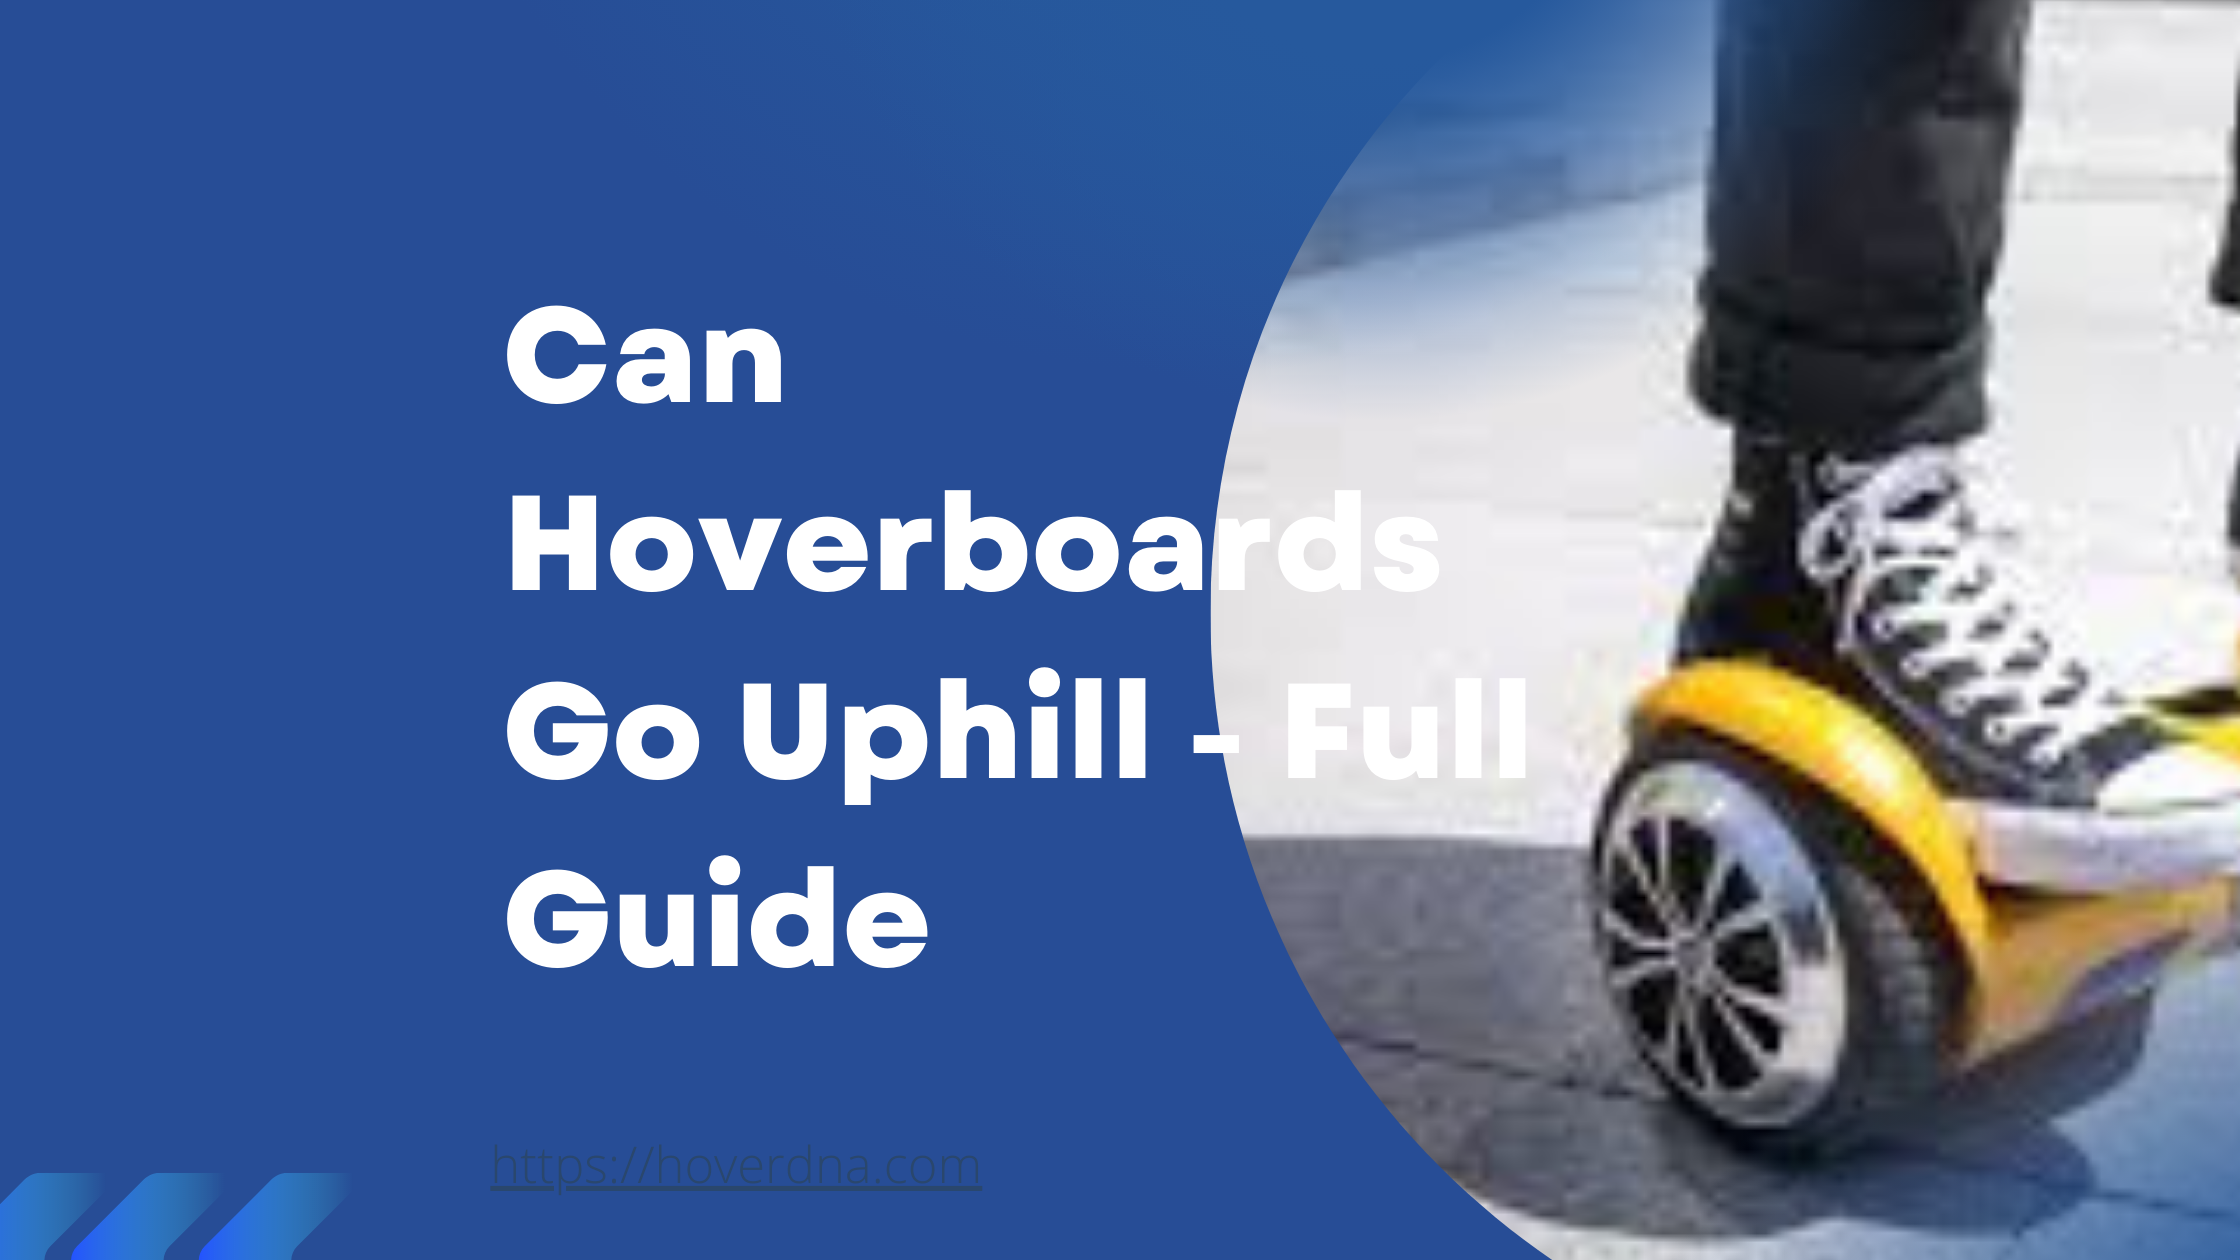 Can Hoverboards Go Uphill - Full Guide